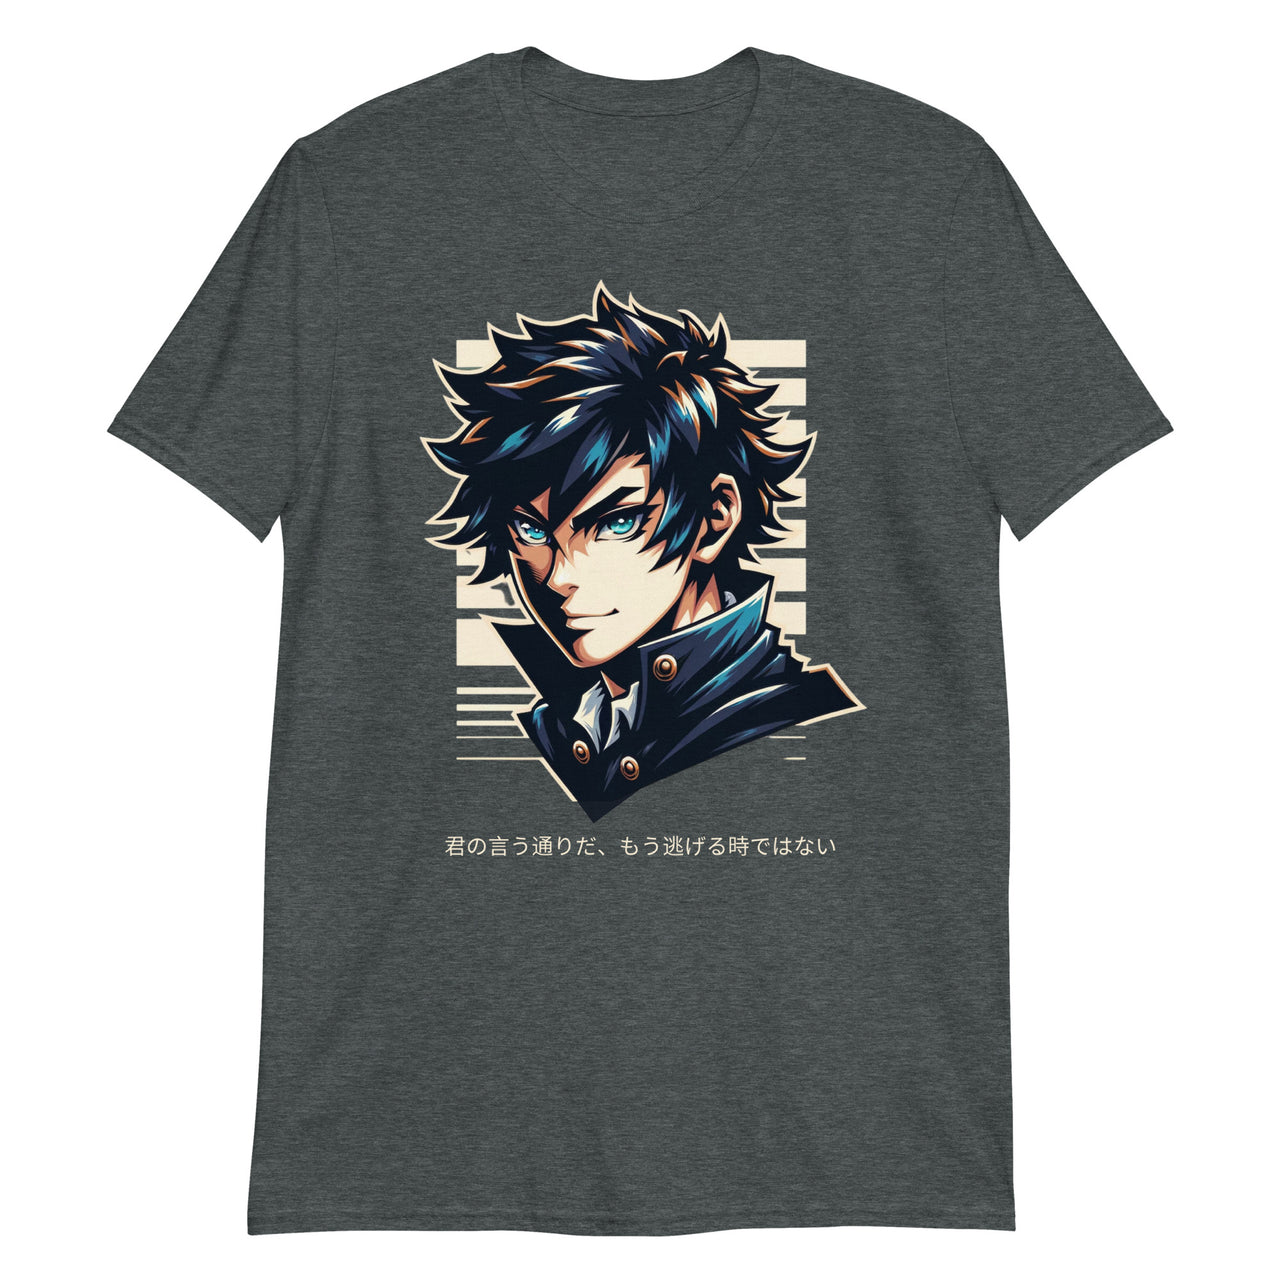 Cool Anime Boy with Determination T-Shirt